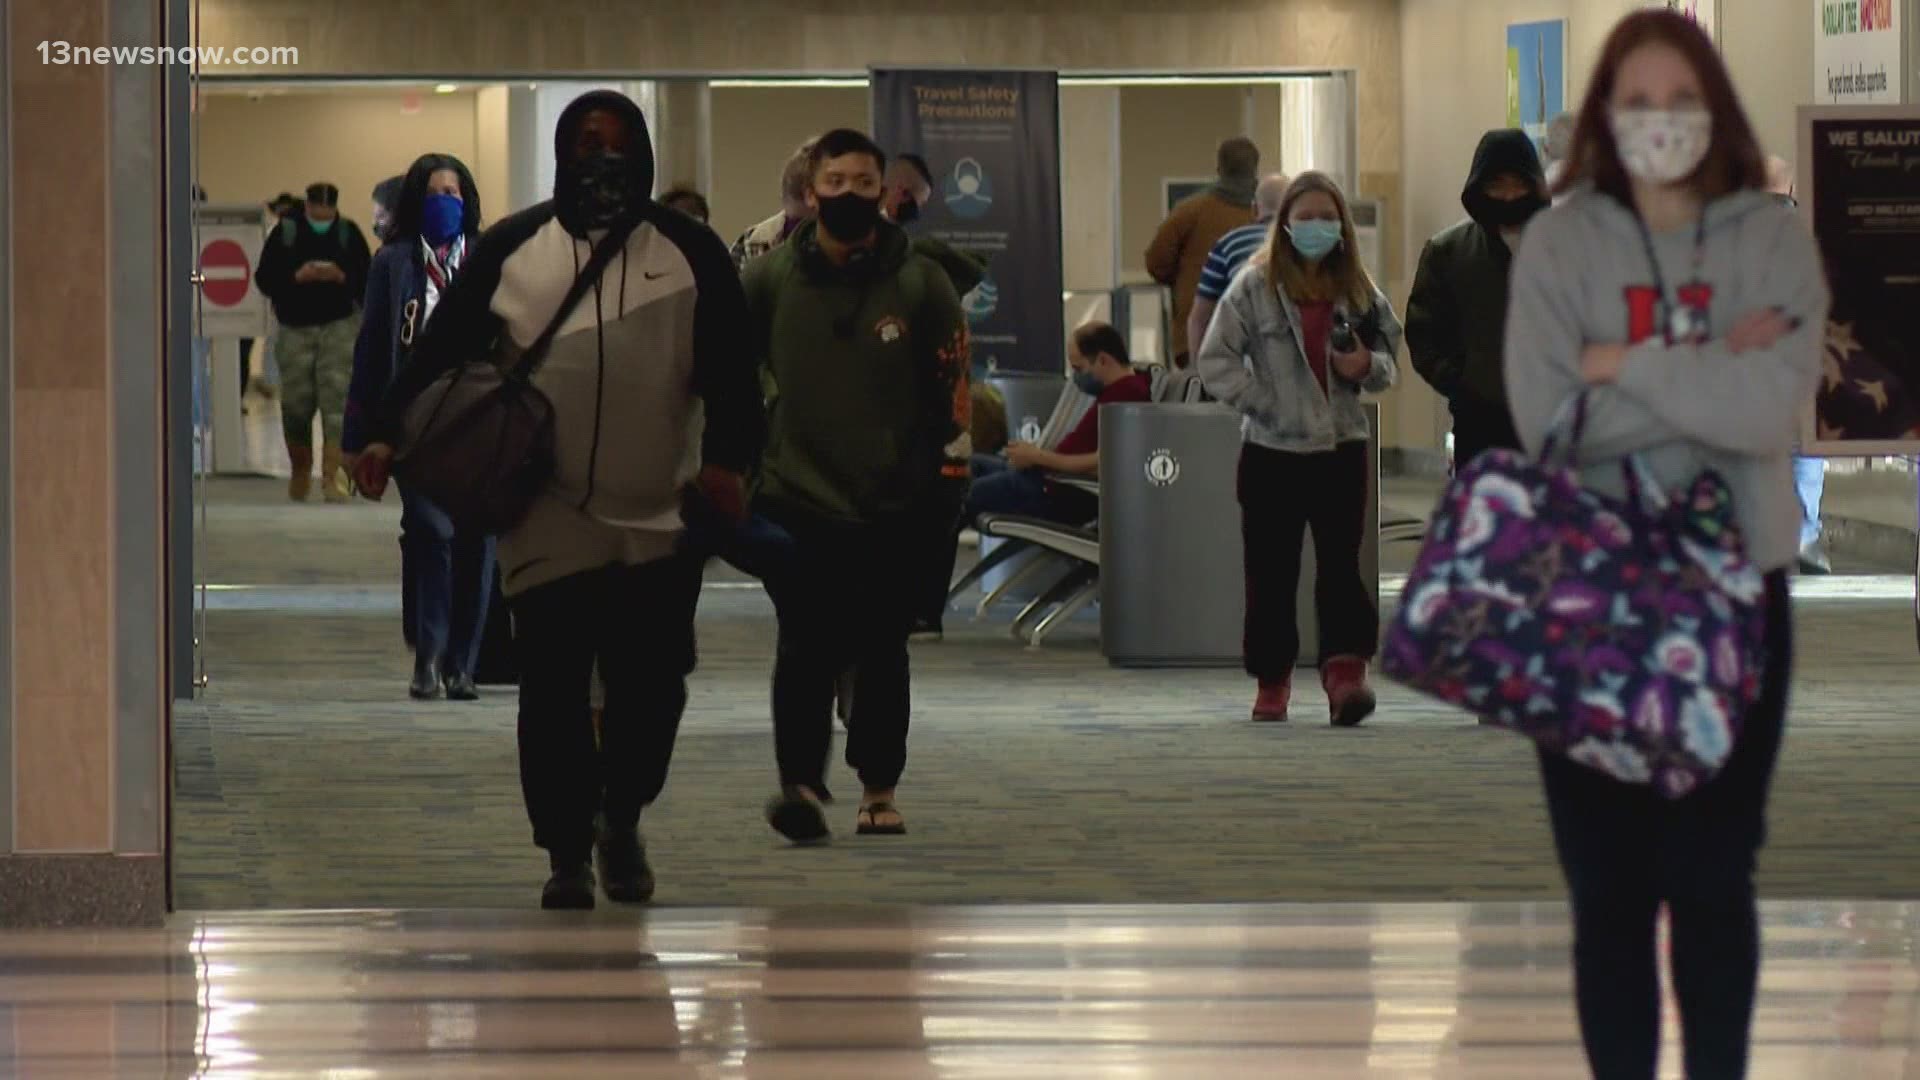 Many travelers say they haven’t seen their families in months. With their masks on and bags in hand, they made their way to their planes.